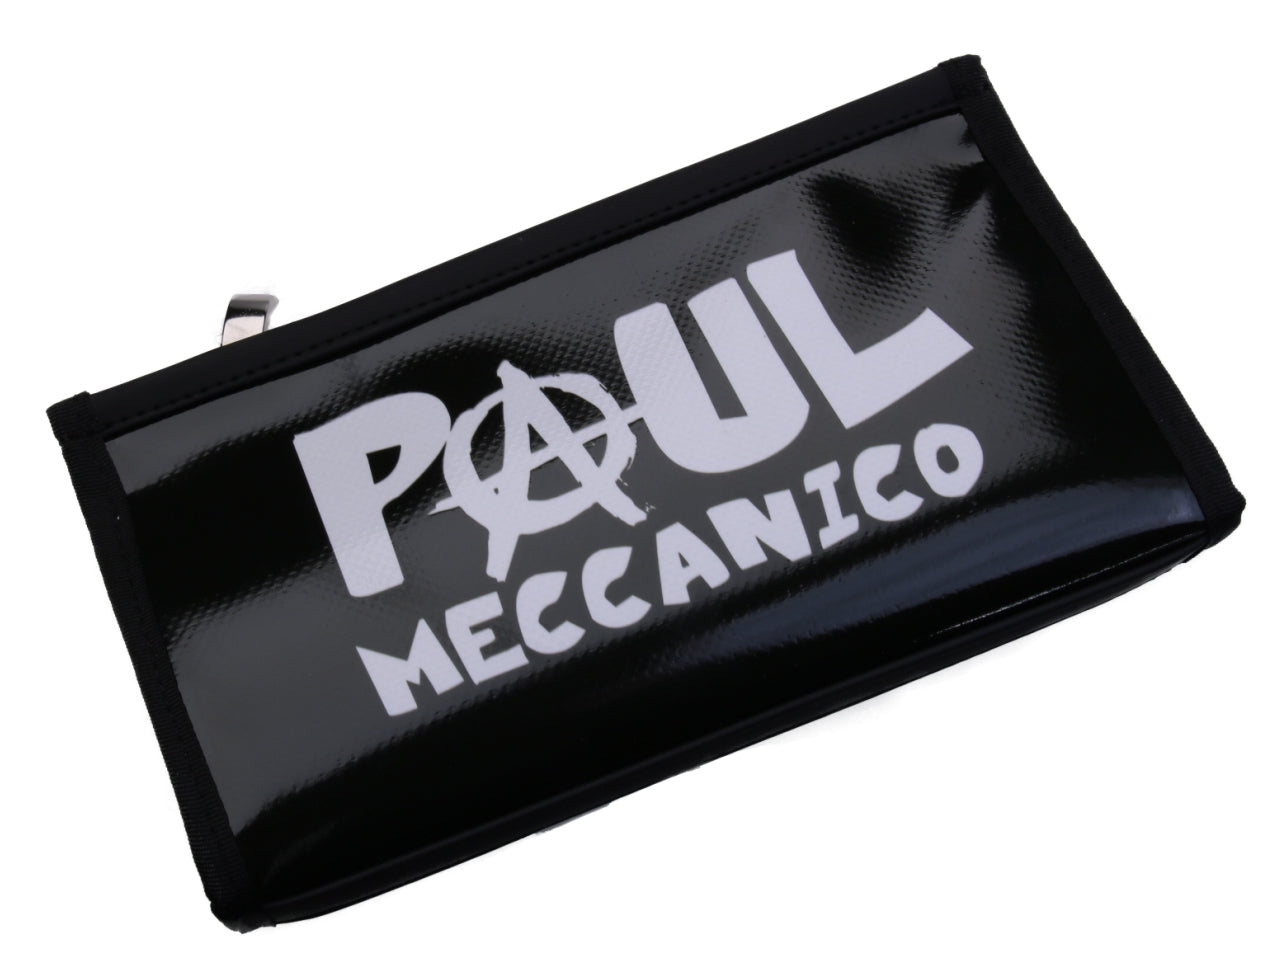 LARGE WOMEN'S WALLET BLACK AND WHITE PAUL MECCANICO. MODEL PIT MADE OF LORRY TARPAULIN. - Limited Edition Paul Meccanico